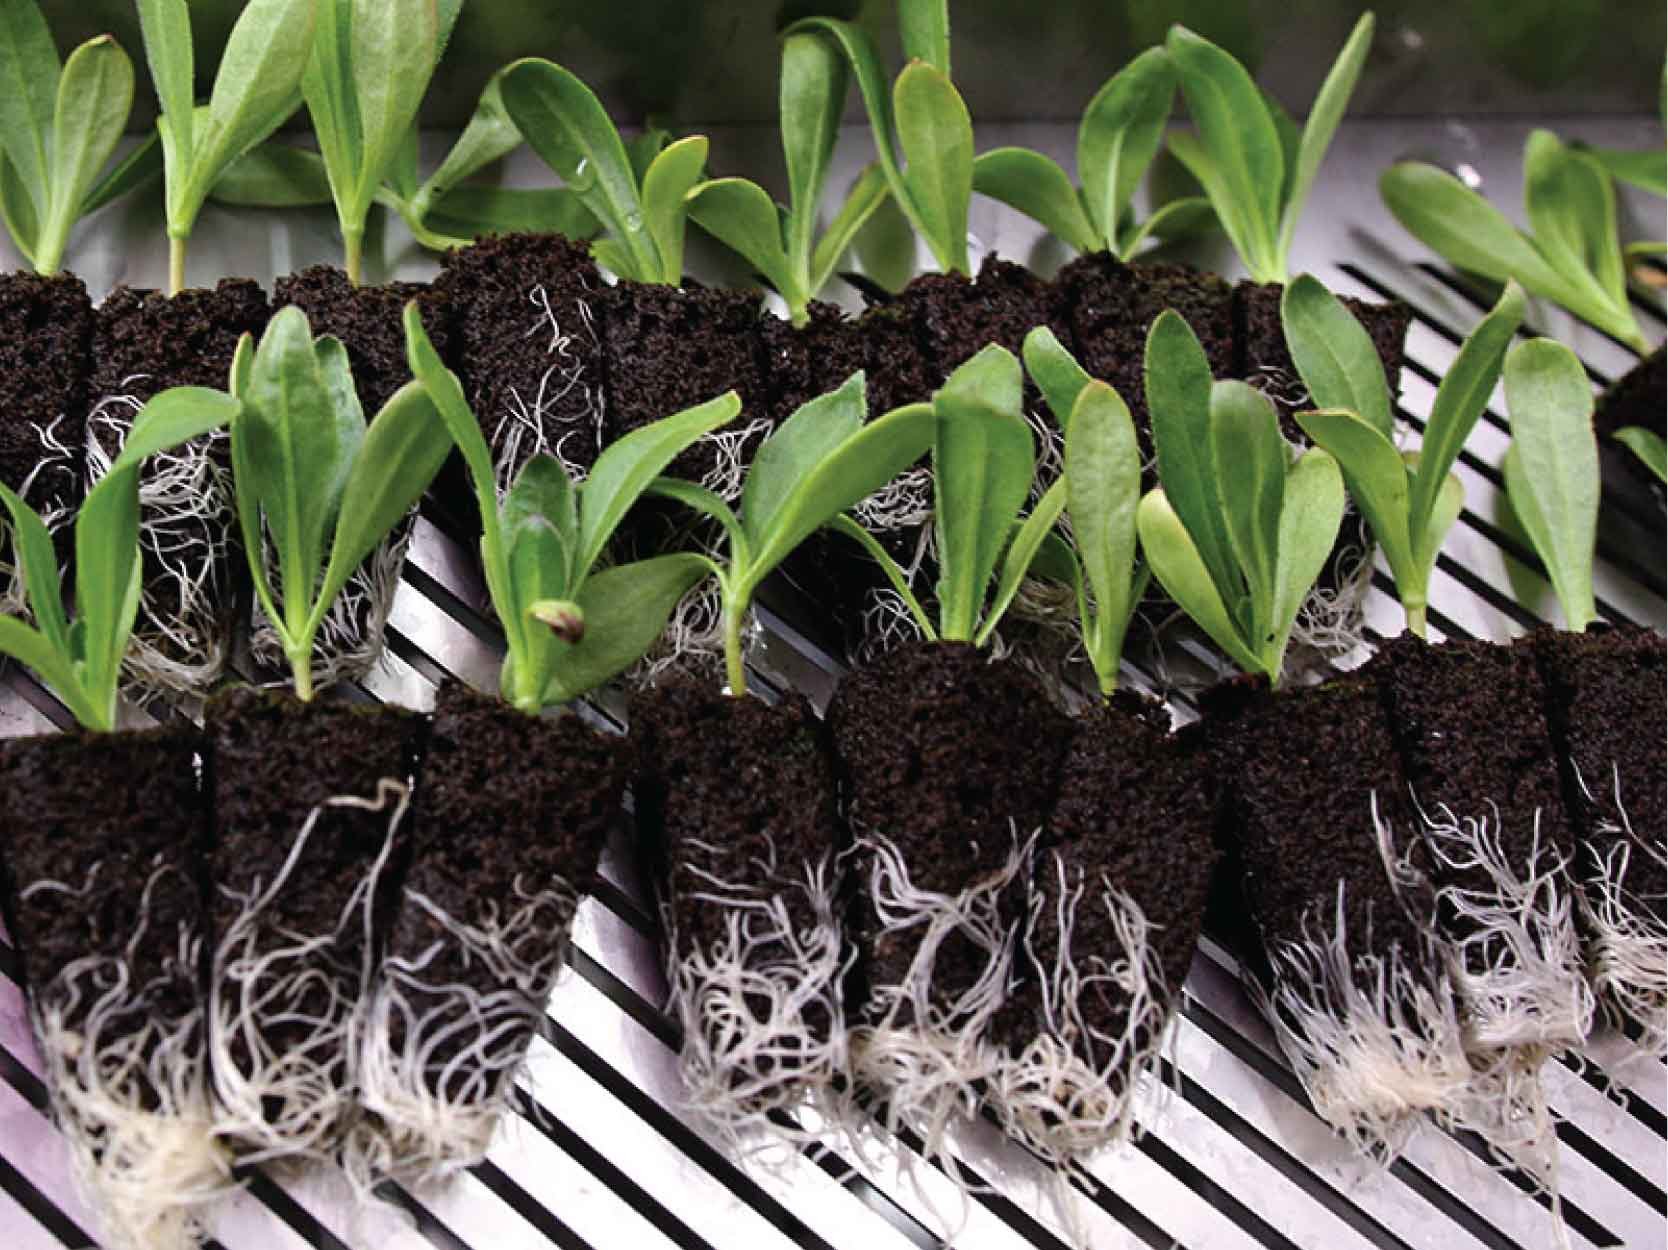 Plants' roots, supported by absorbent coco and peat moss grow plugs